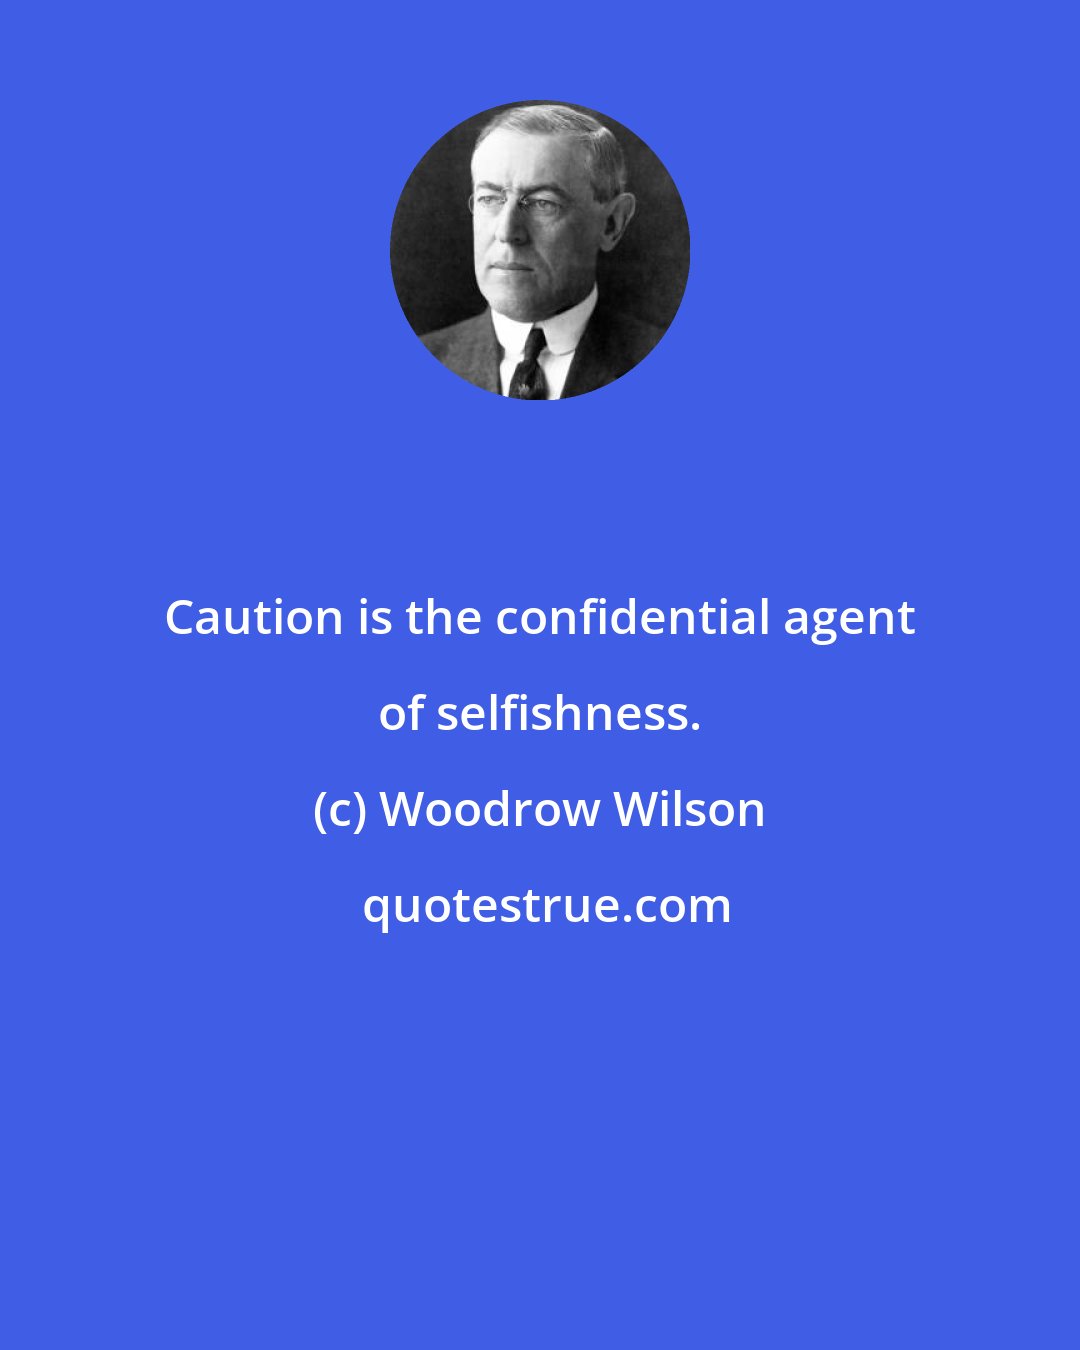 Woodrow Wilson: Caution is the confidential agent of selfishness.